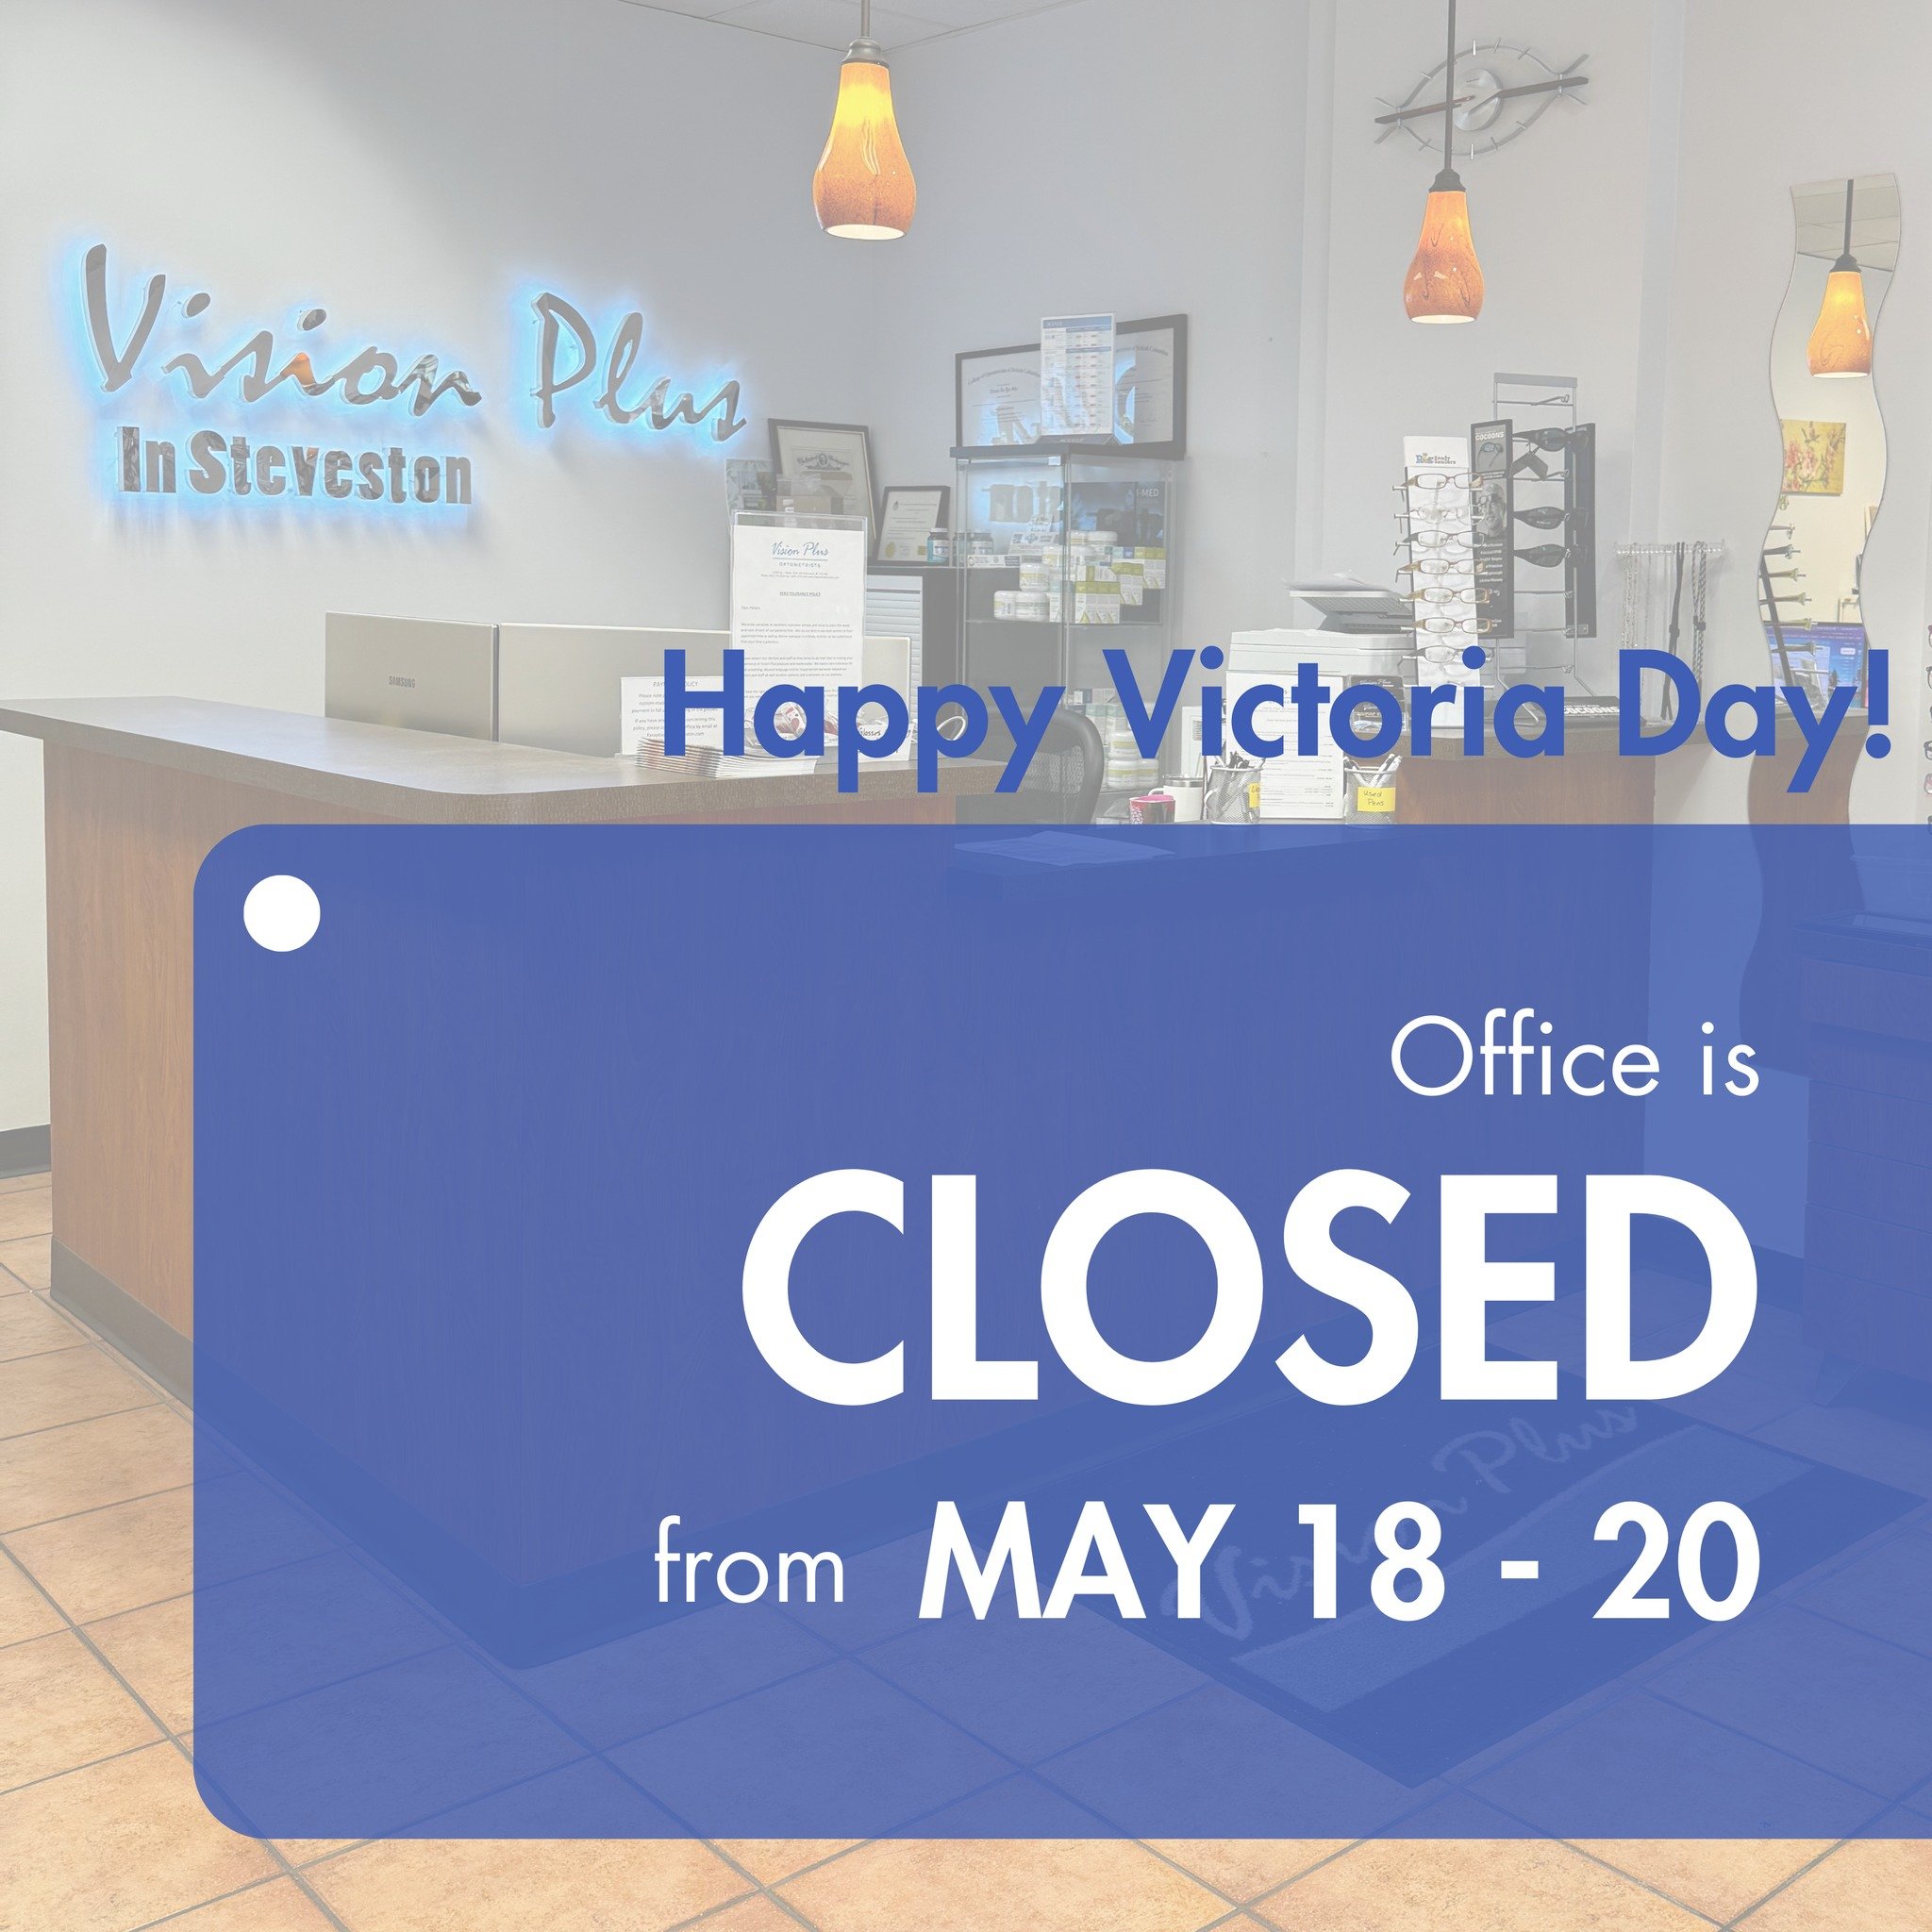 Happy Victoria Day🇨🇦! Our office will be closed from May 18-20 and reopen on May 21 to assist with your vision needs!

#victoriaday #officeclosed #eyecare #optometry #contactlenses #vision #eyehealth #eyeexam #health #optometrists #optometristsofin